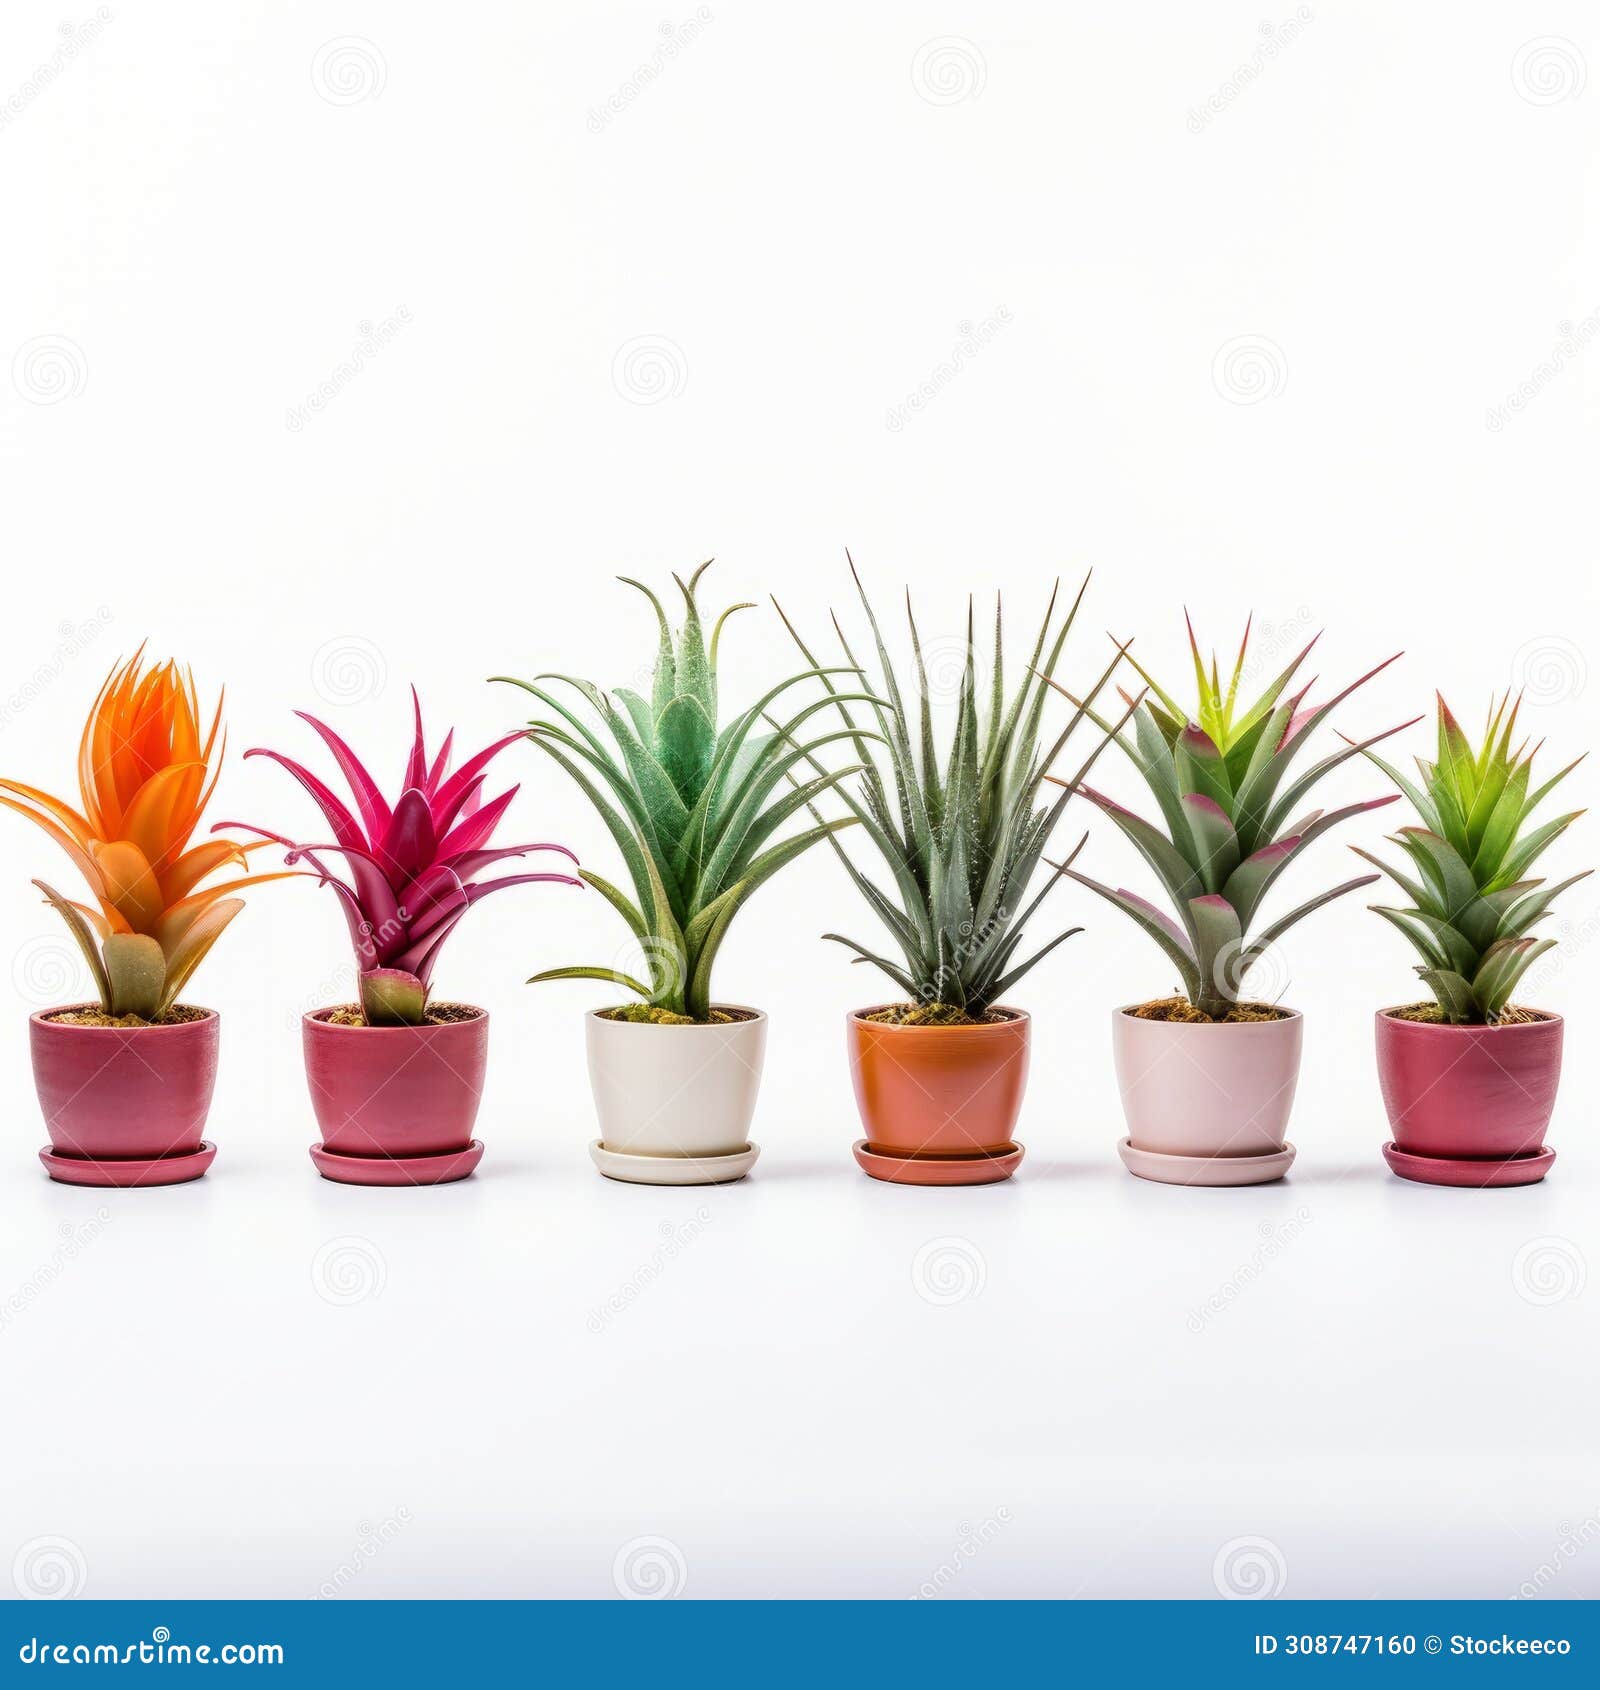 colorful lensbaby optics: nine small air plants in vibrant pots